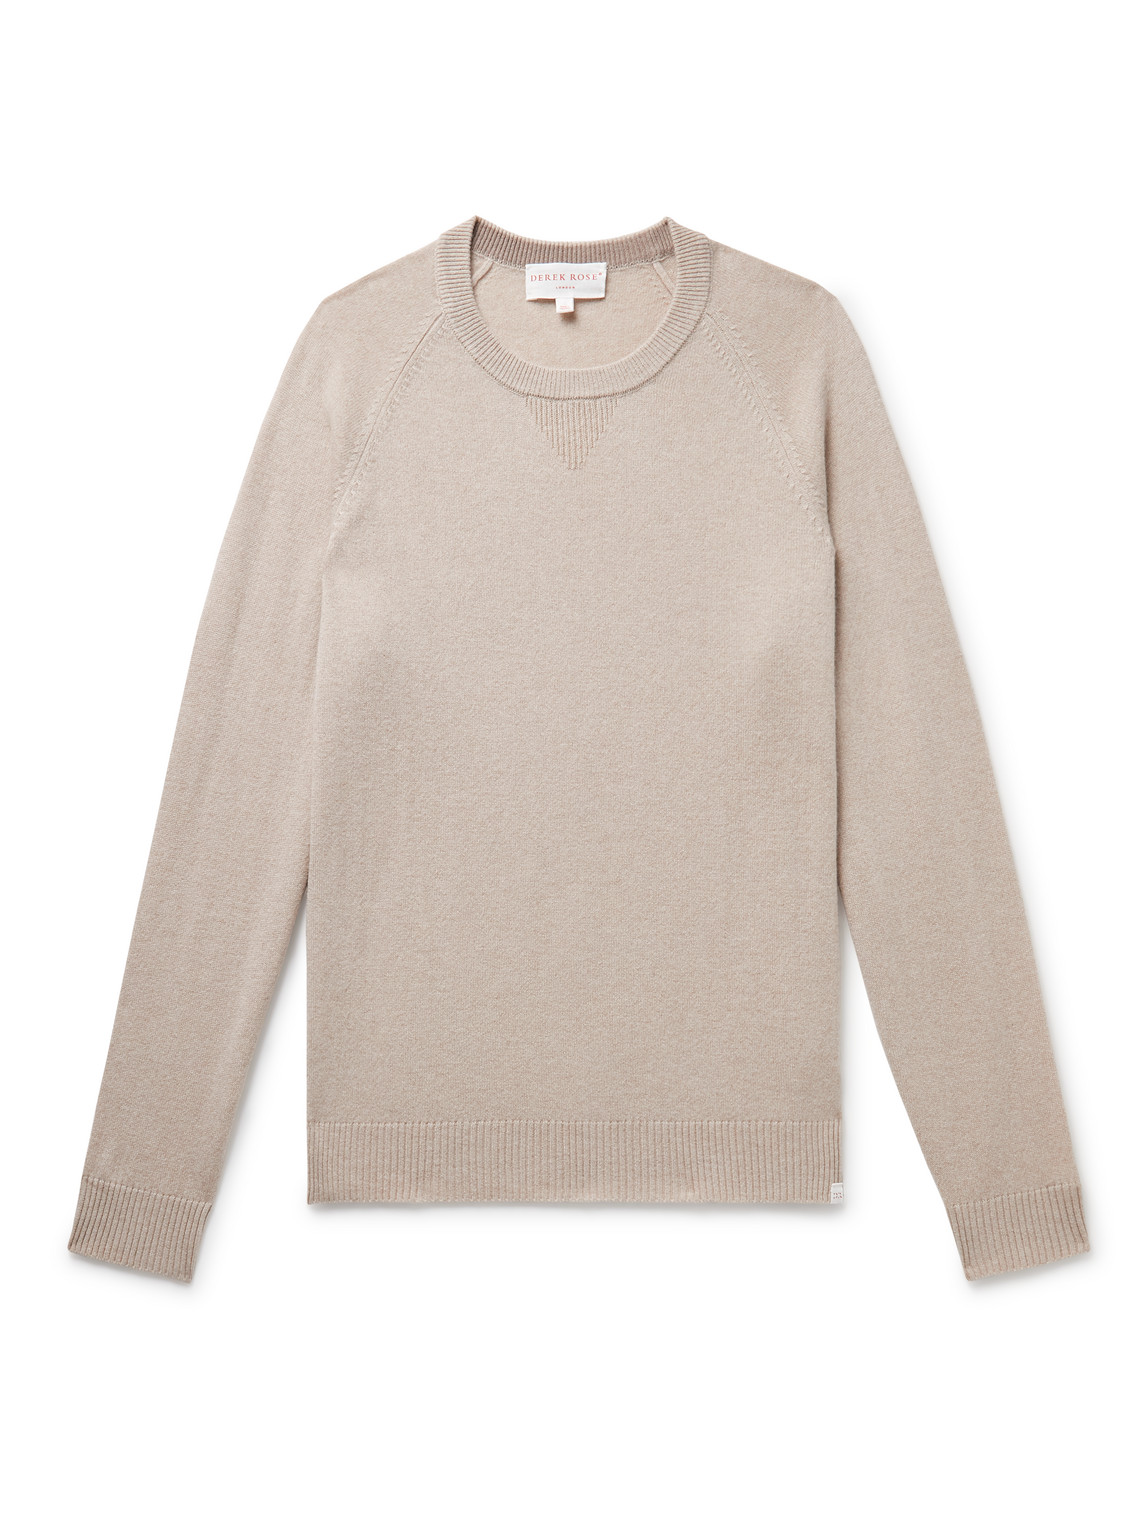 Finley 10 Cashmere Sweater